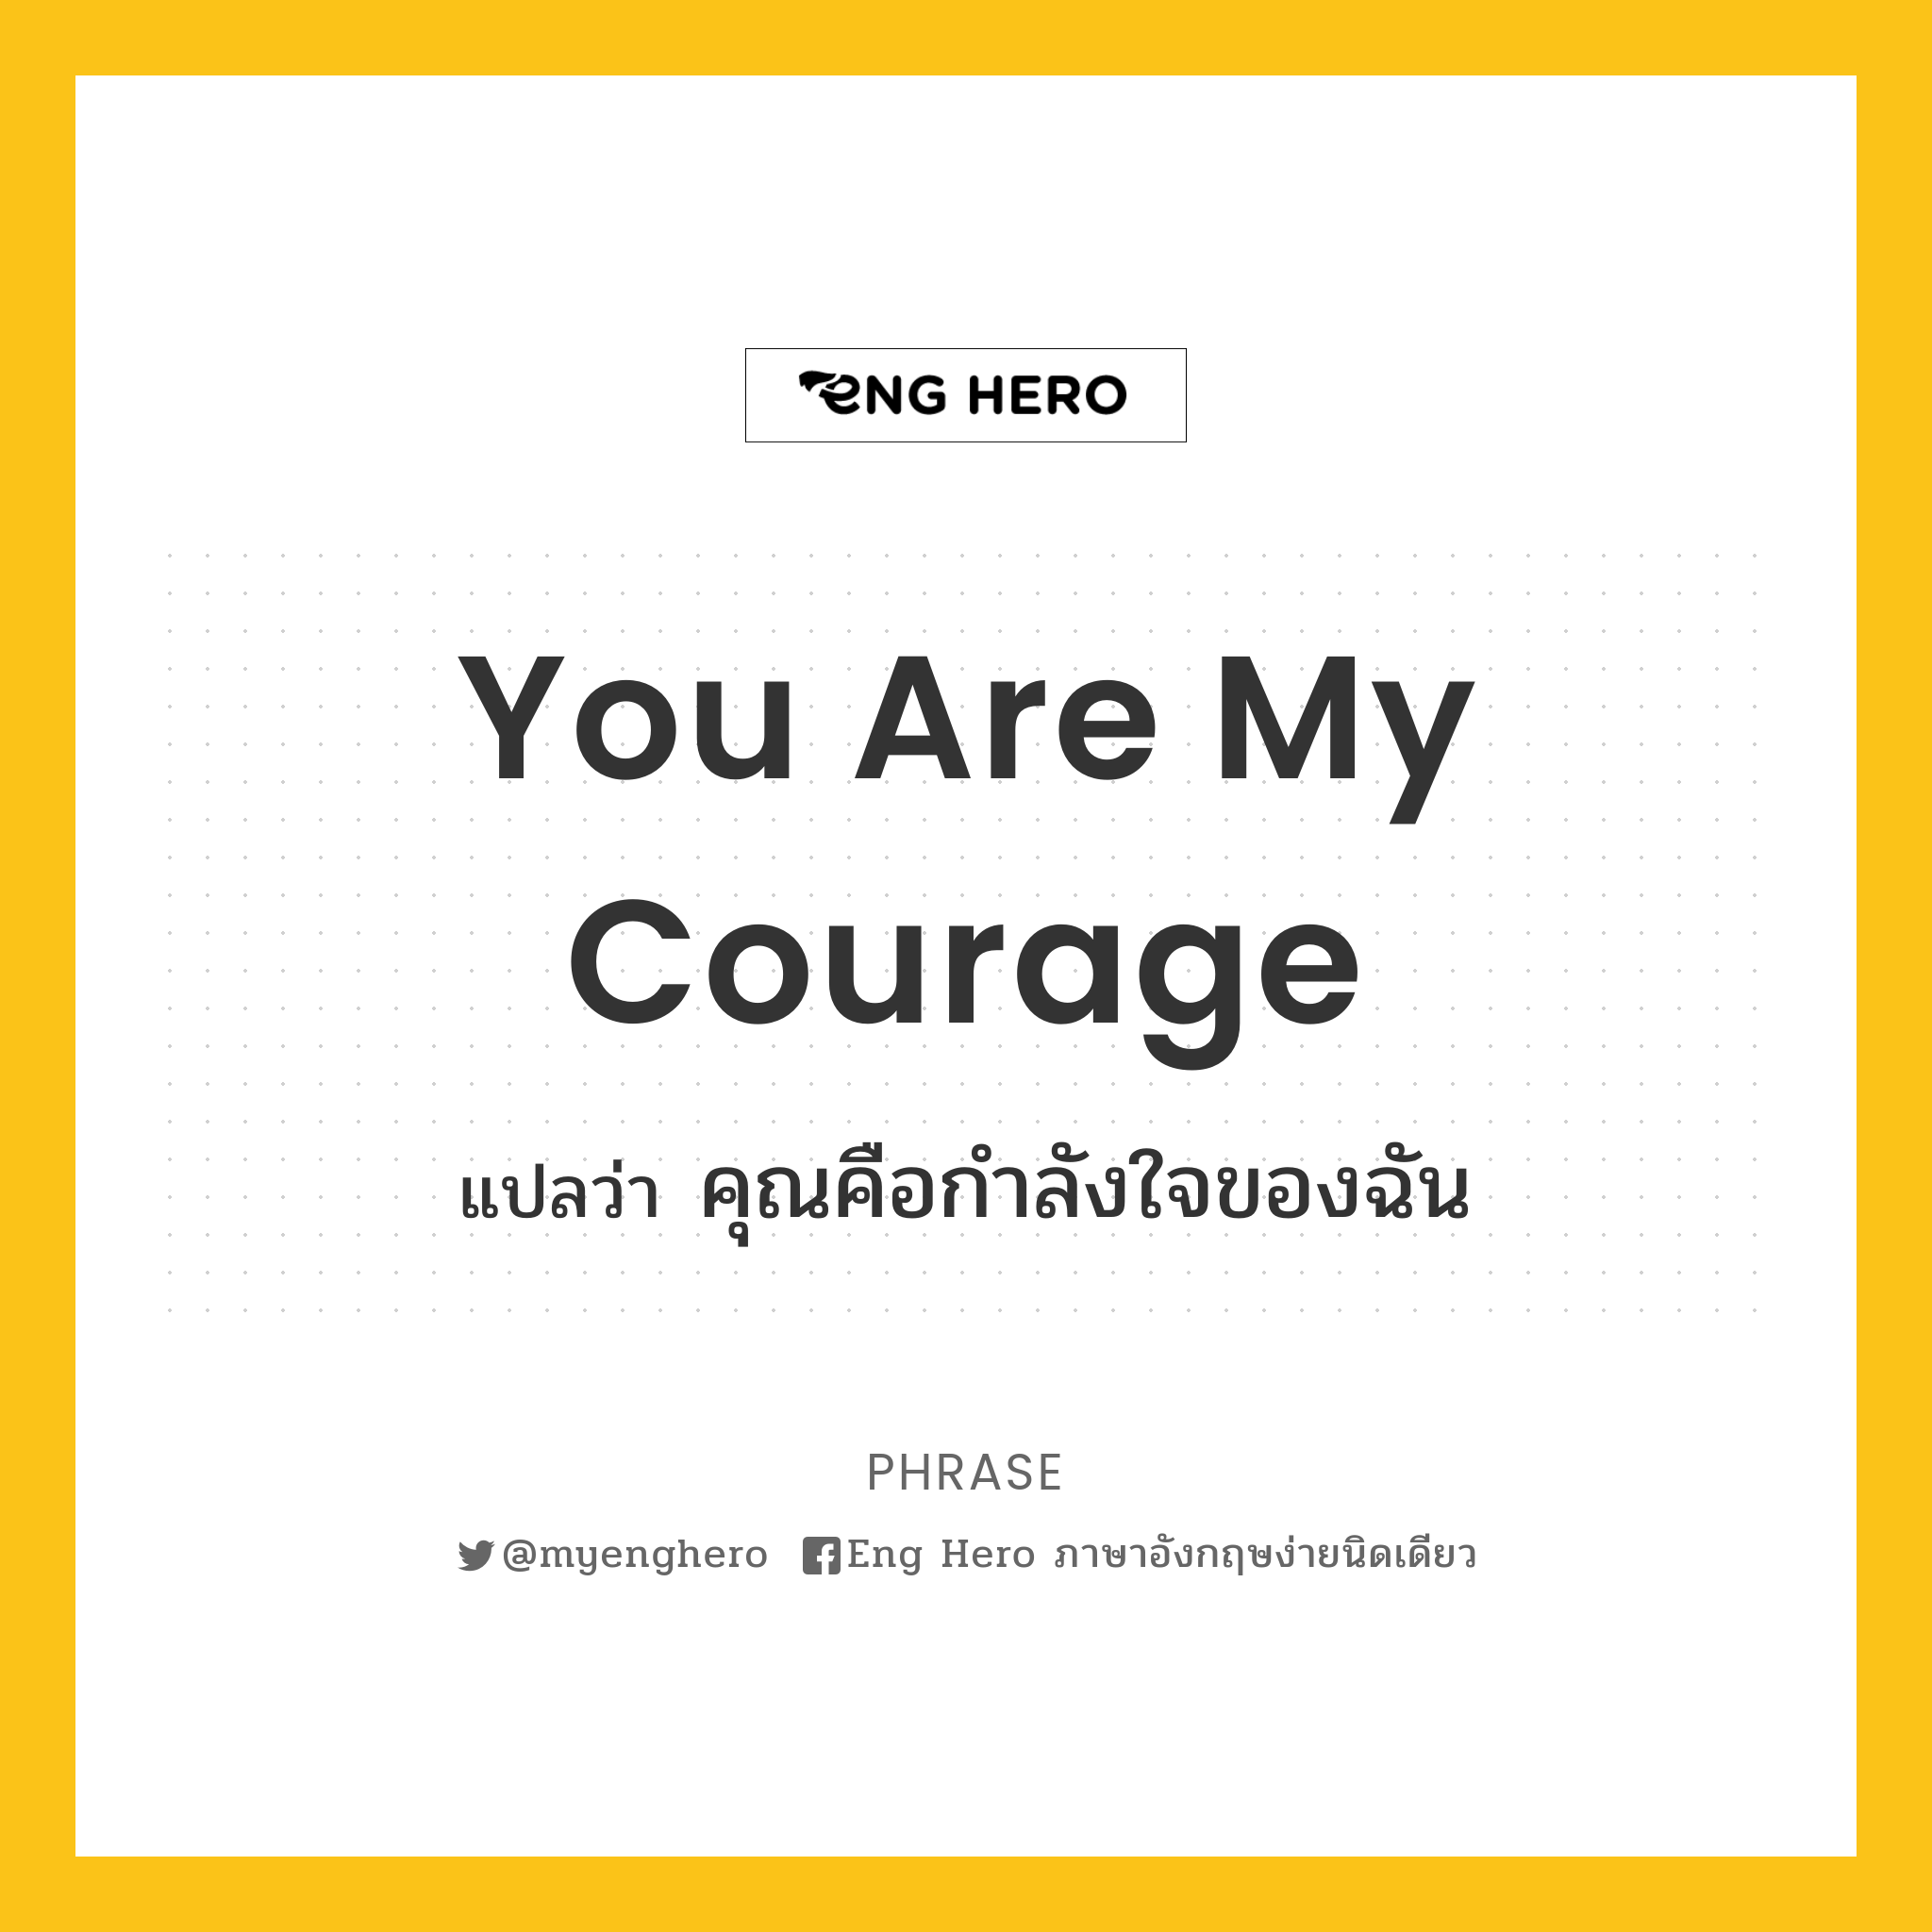 You are my courage